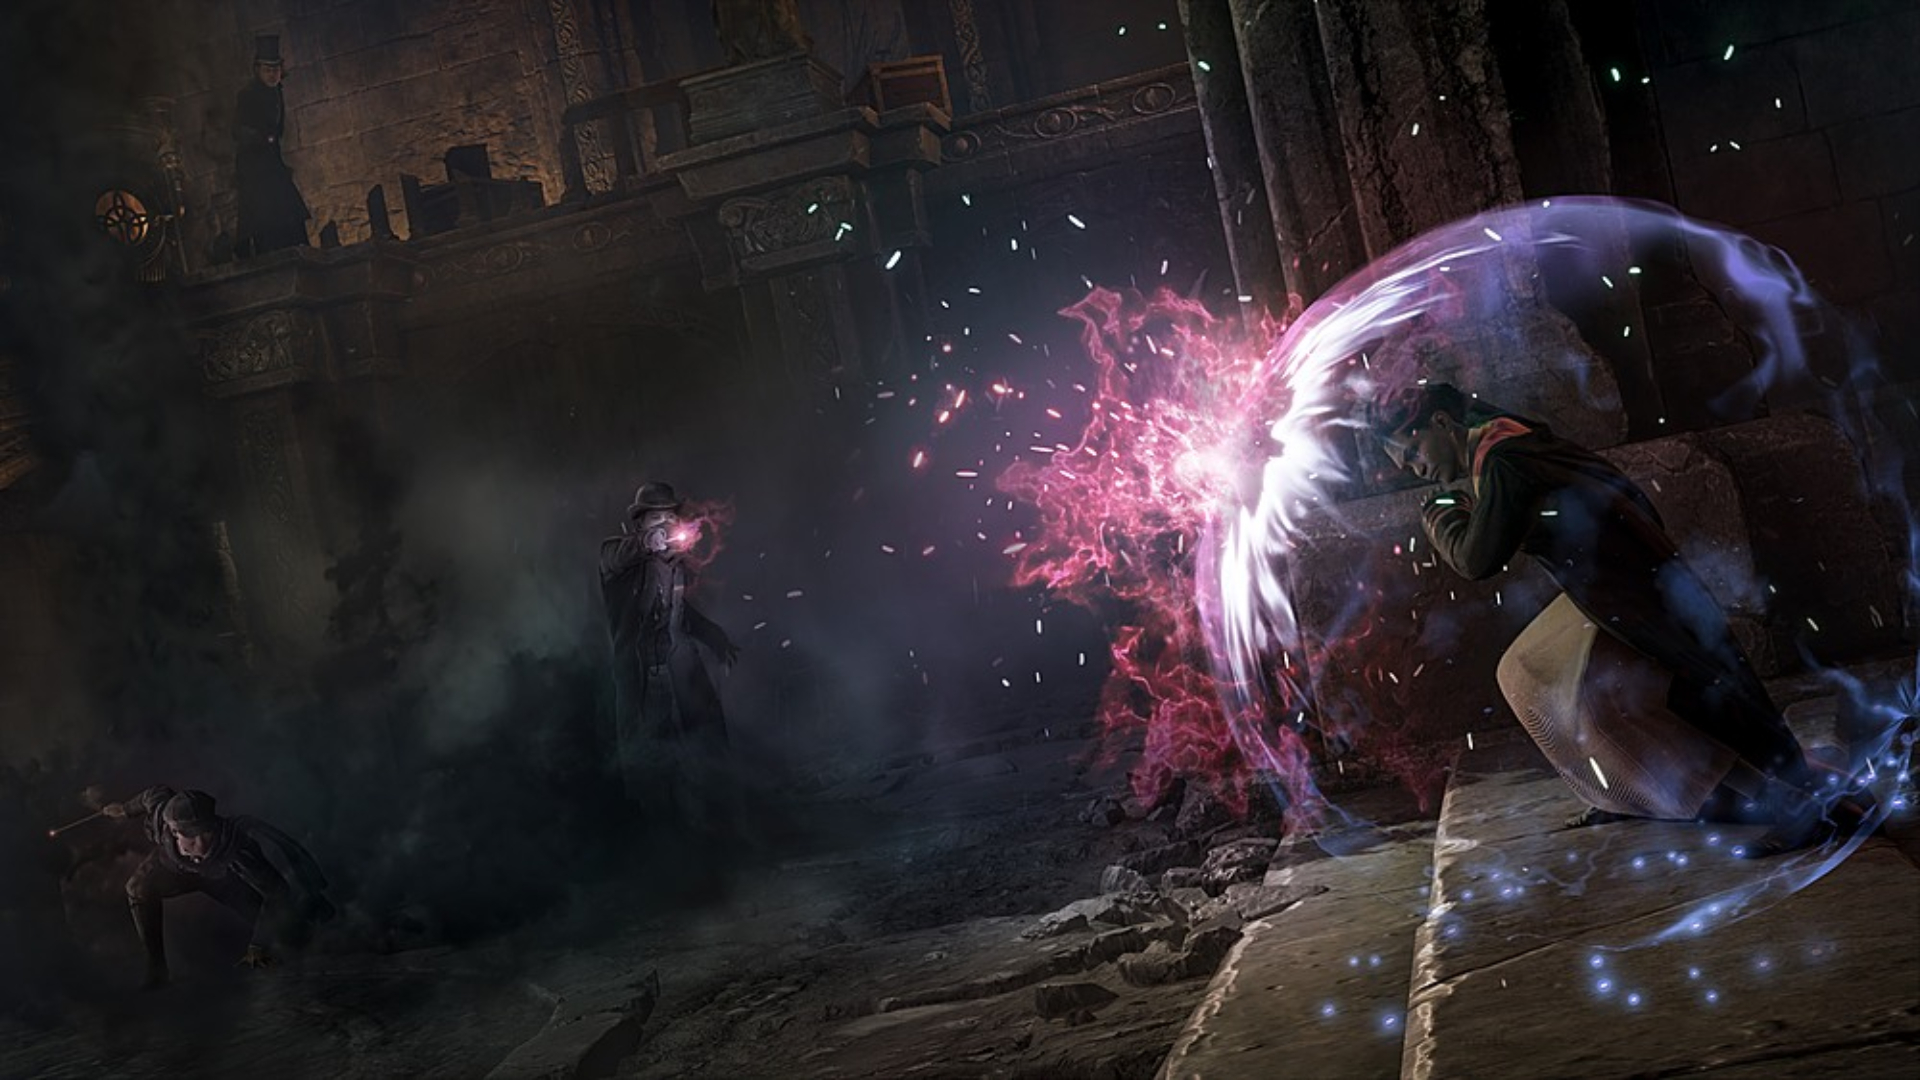 Best wizard games: Hogwarts Legacy. Image shows a student using a magical shield to protect themselves from an attack by a wizard.